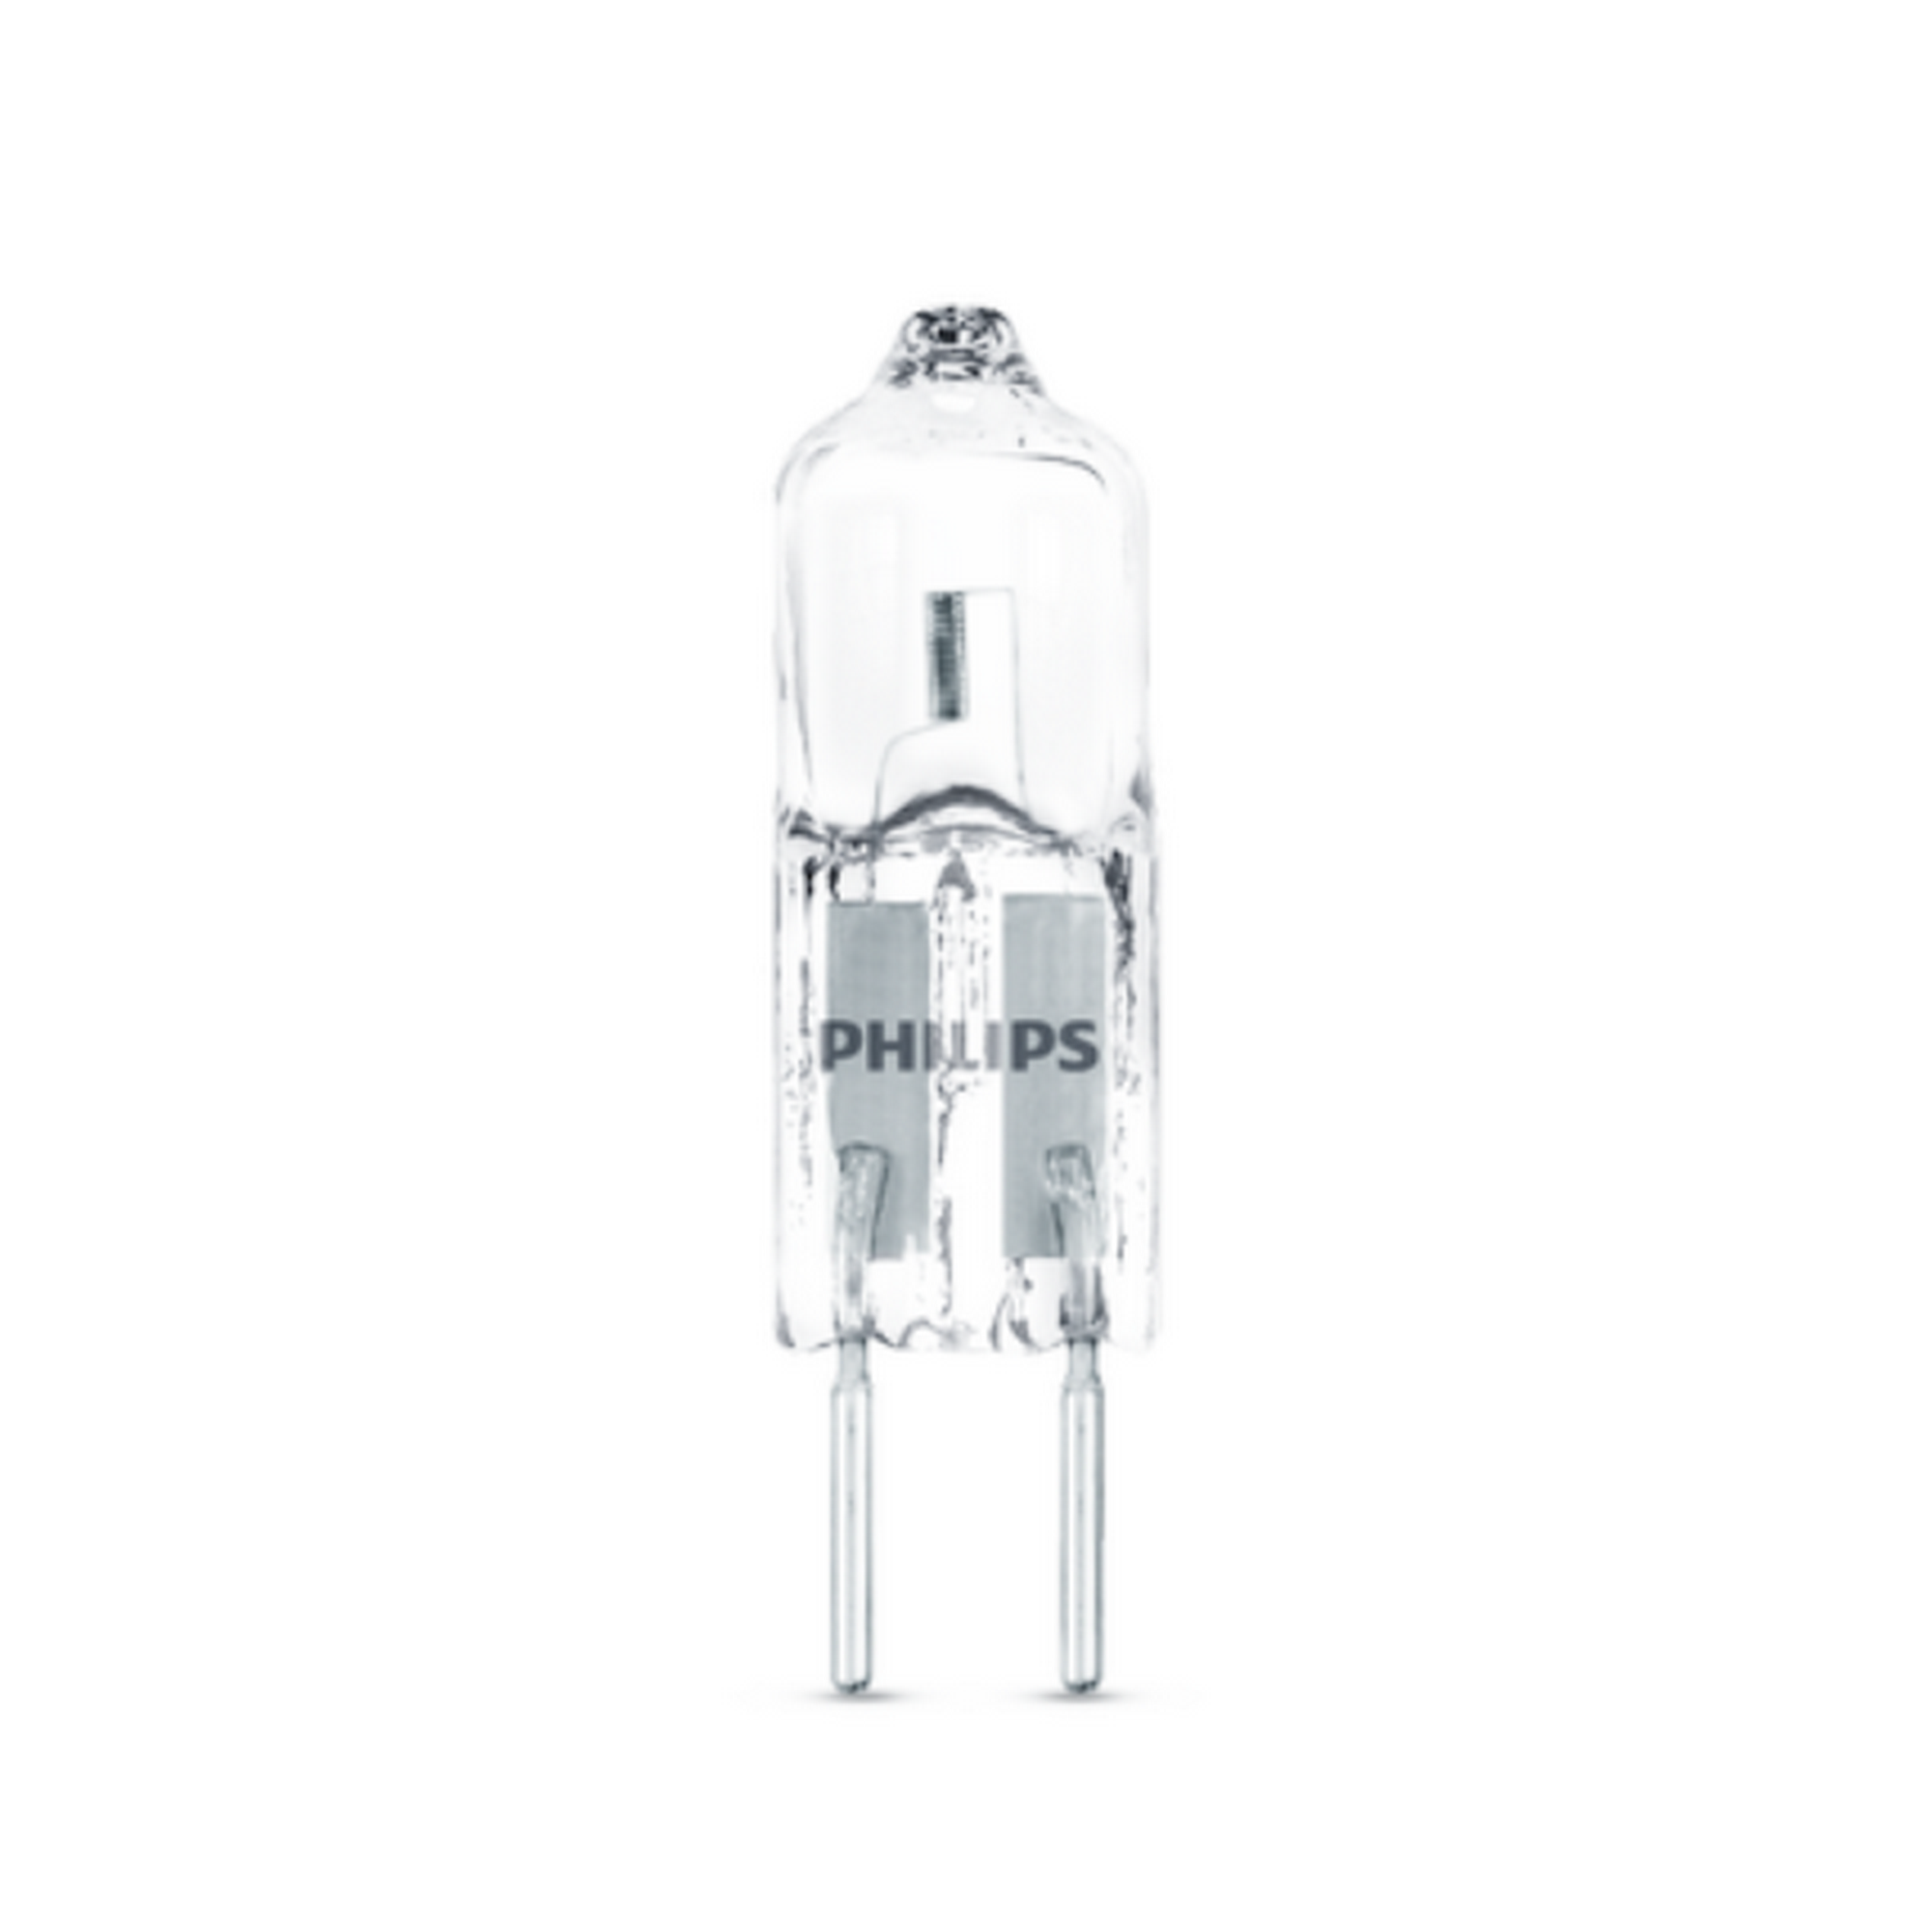 Halogenbrenner G4 85 lm transparent dimmbar 2 Stk. + product picture